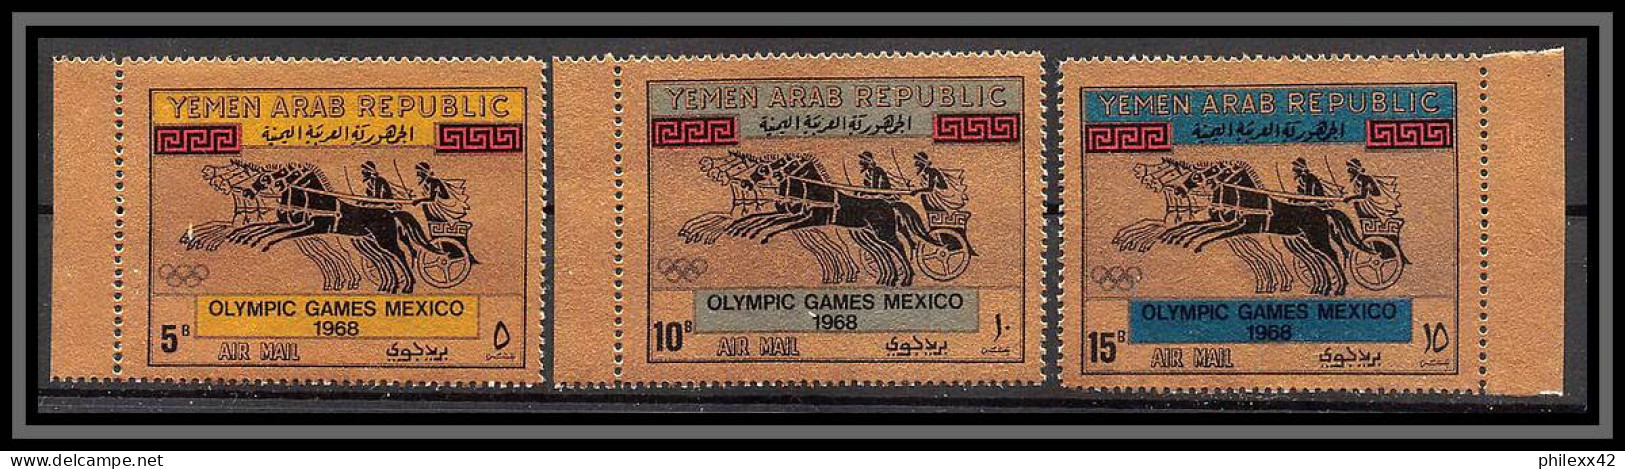 Nord Yemen YAR - 4402/ N°742/744 Jeux Olympiques (olympic Games) Mexico 1968 OR Gold Stamps Neuf ** MNH - Ete 1968: Mexico